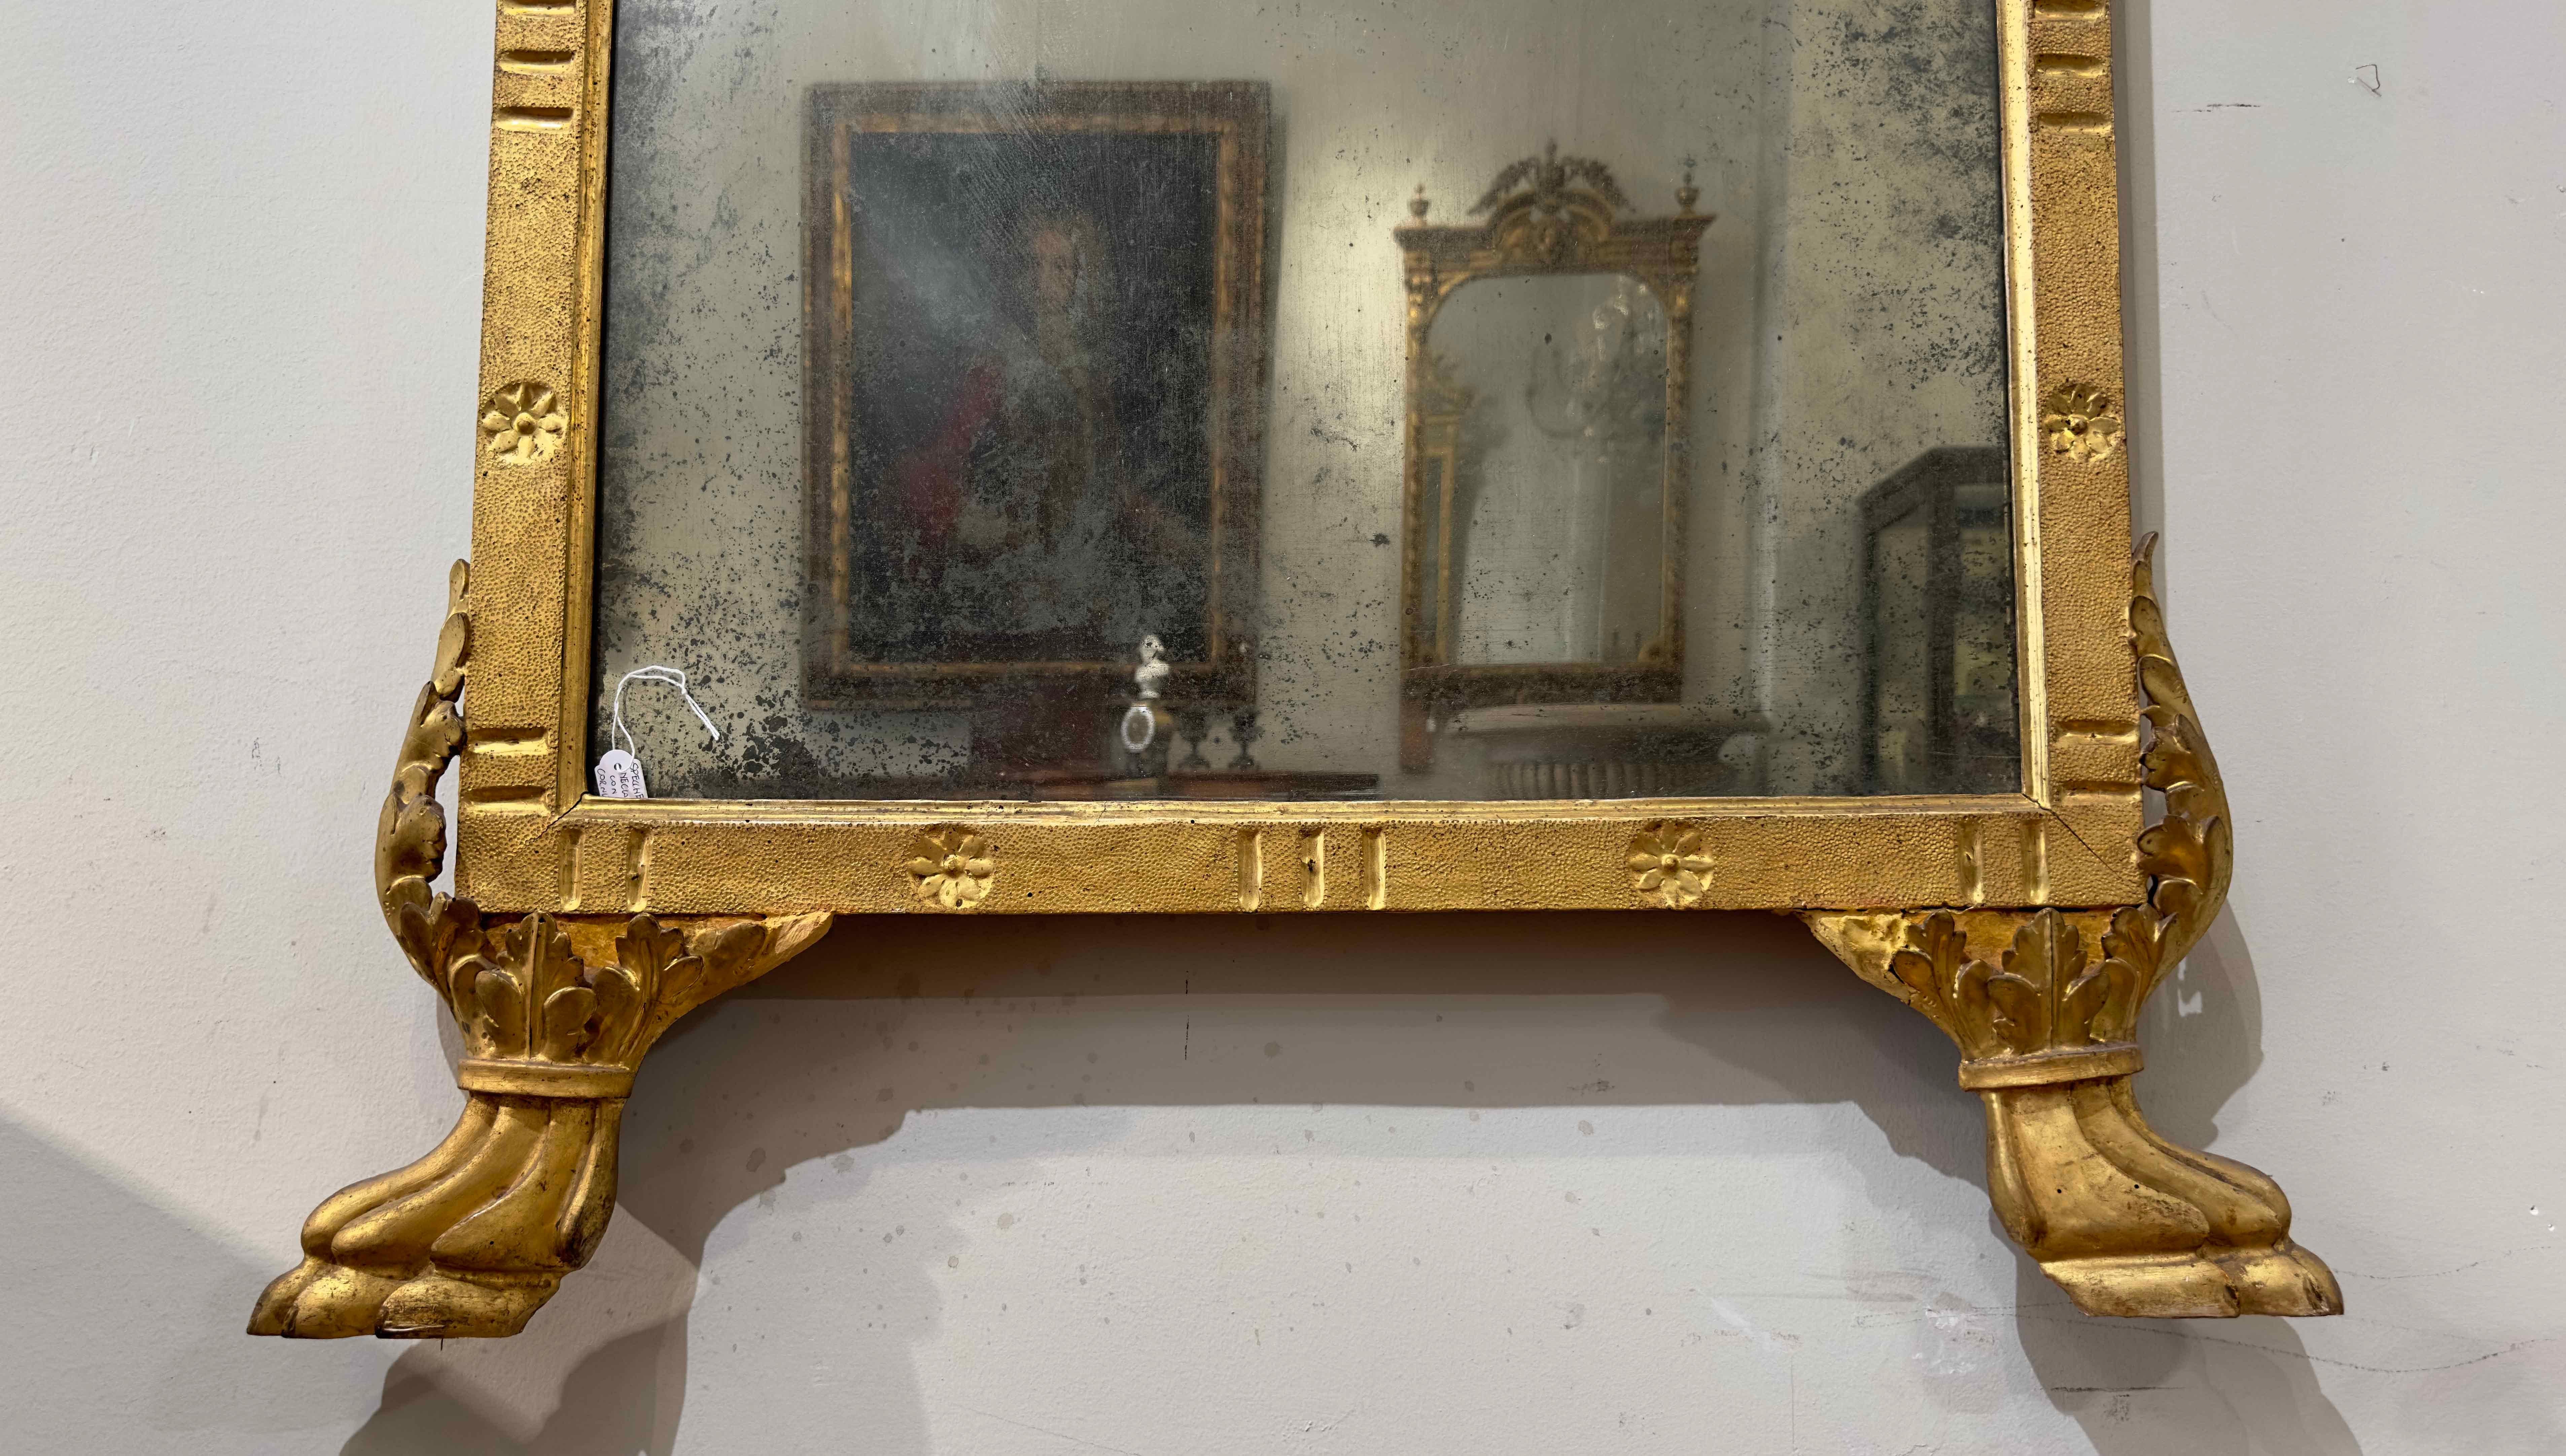 END OF THE 18th CENTURY NEOCLASSICAL MIRROR WITH CORNUCOPIAS AND OLIVE BRANCHES  1